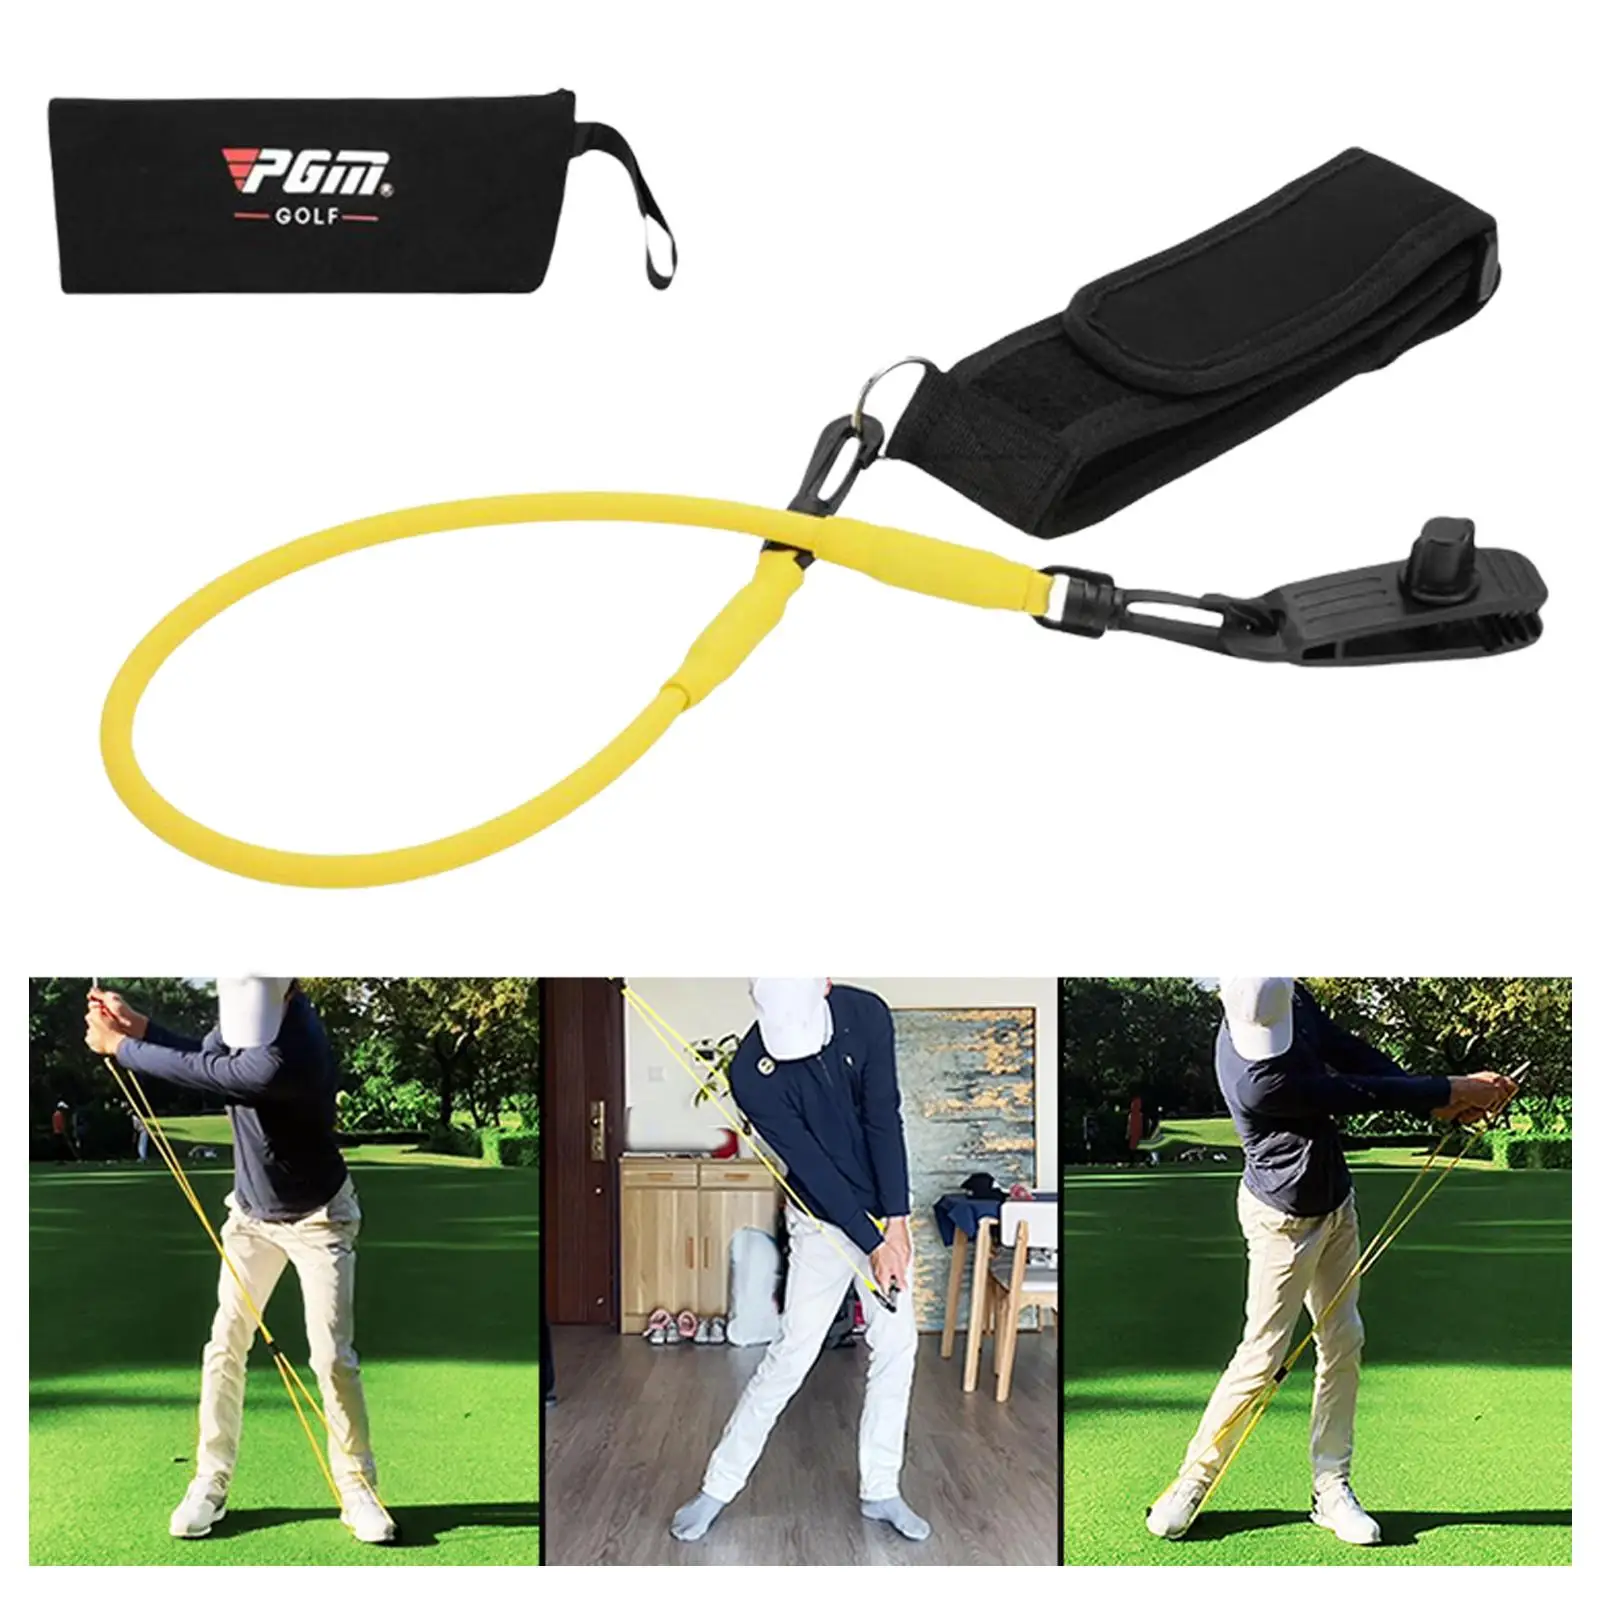 Golf Swing Trainer Aid Arm Belt Posture Practicing Guide Training Correcting